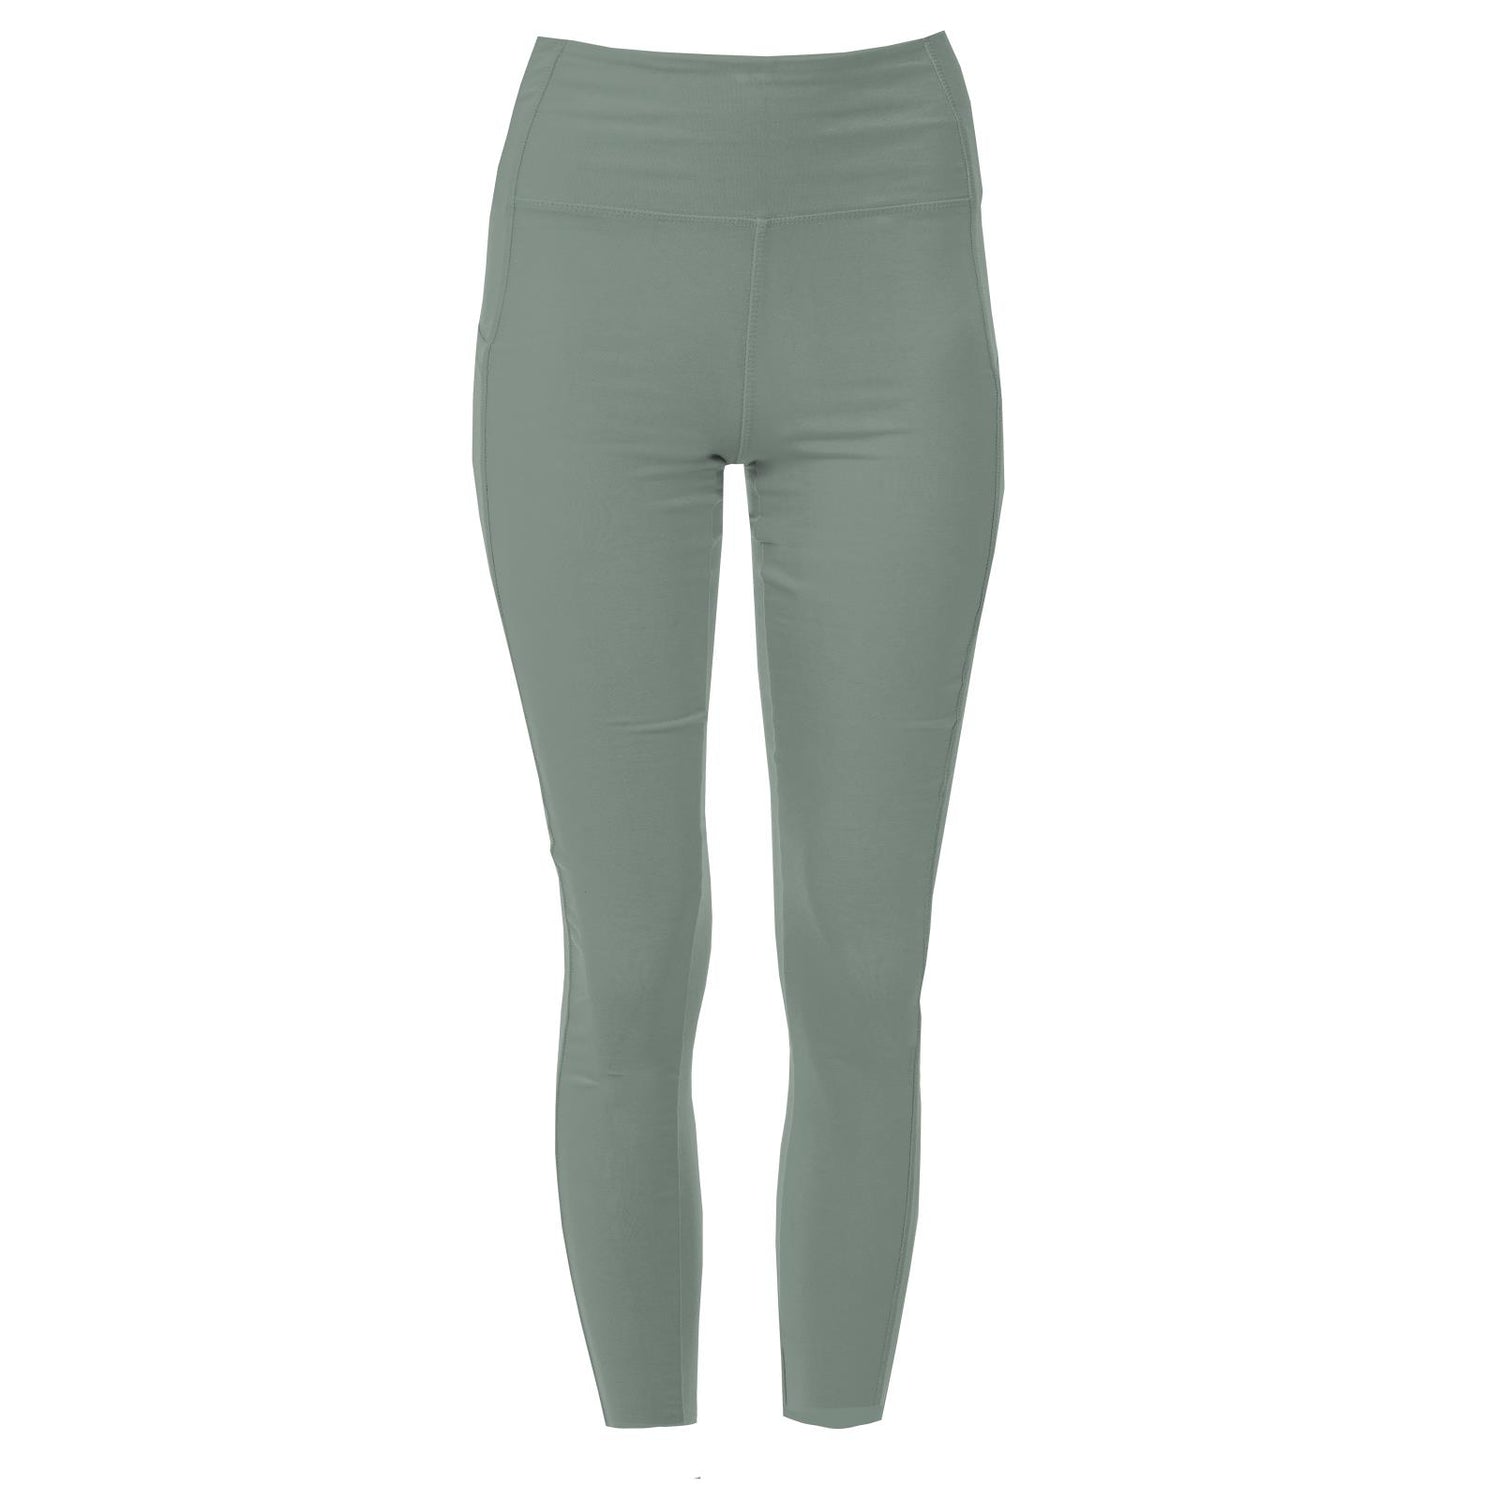 Women's Luxe Stretch 7/8 Leggings with Pockets in Lily Pad